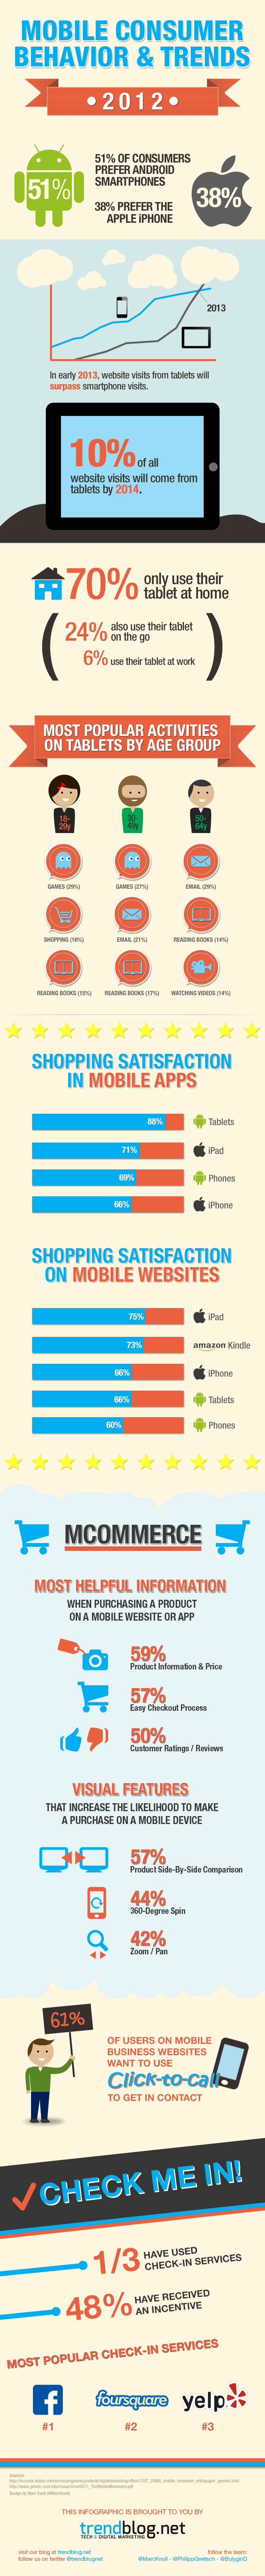 Mobile Consumer Behavior And Trends 2012